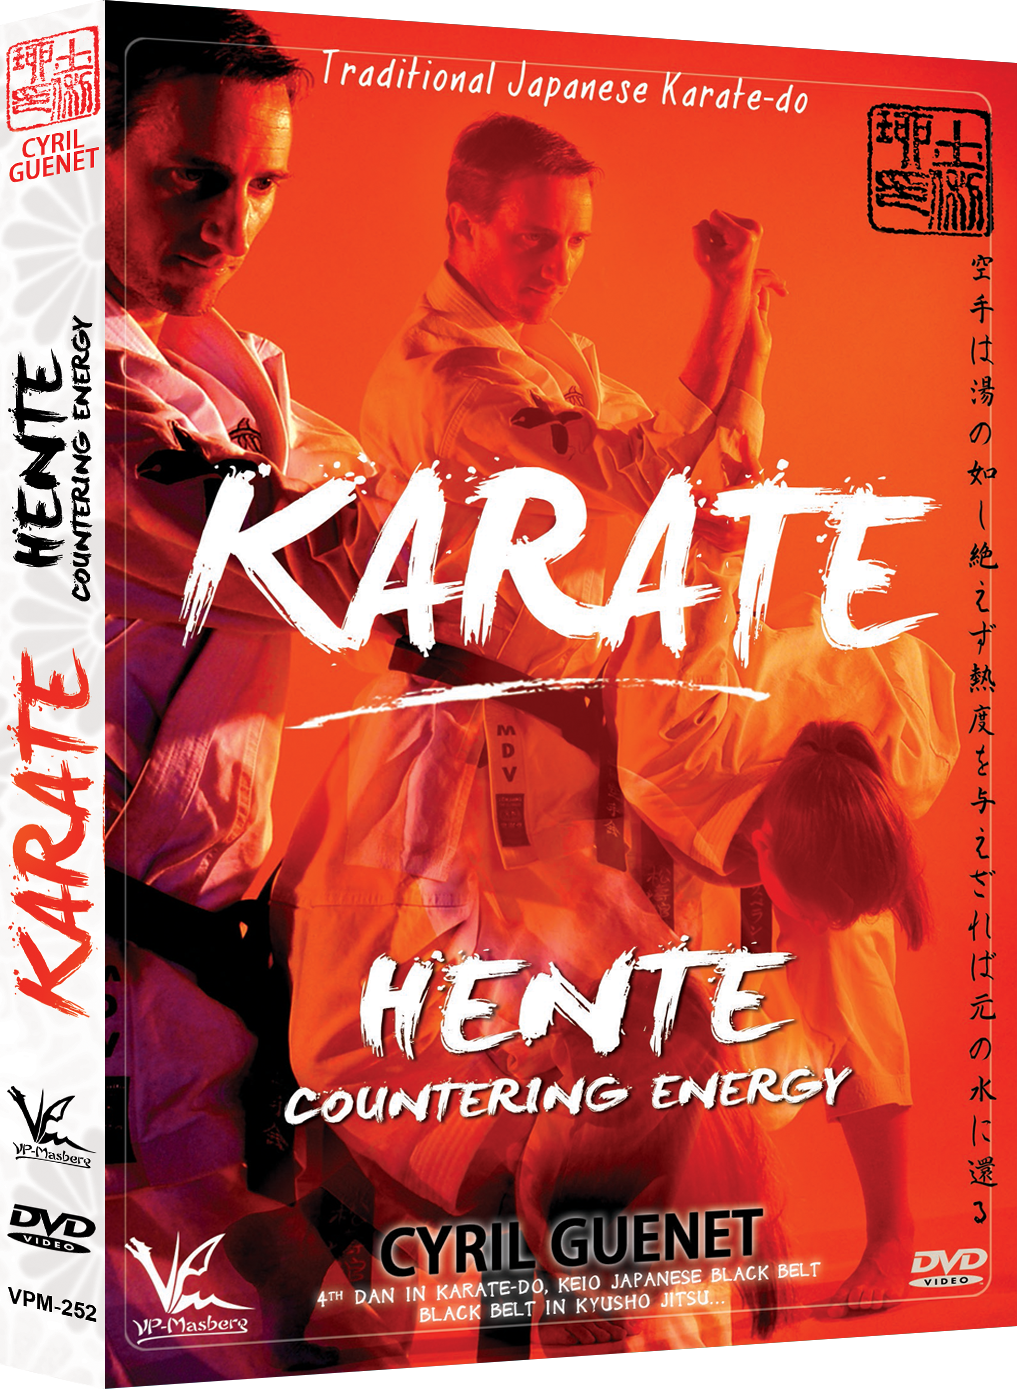 Karate - Hente Countering Energy DVD by Cyril Guenet